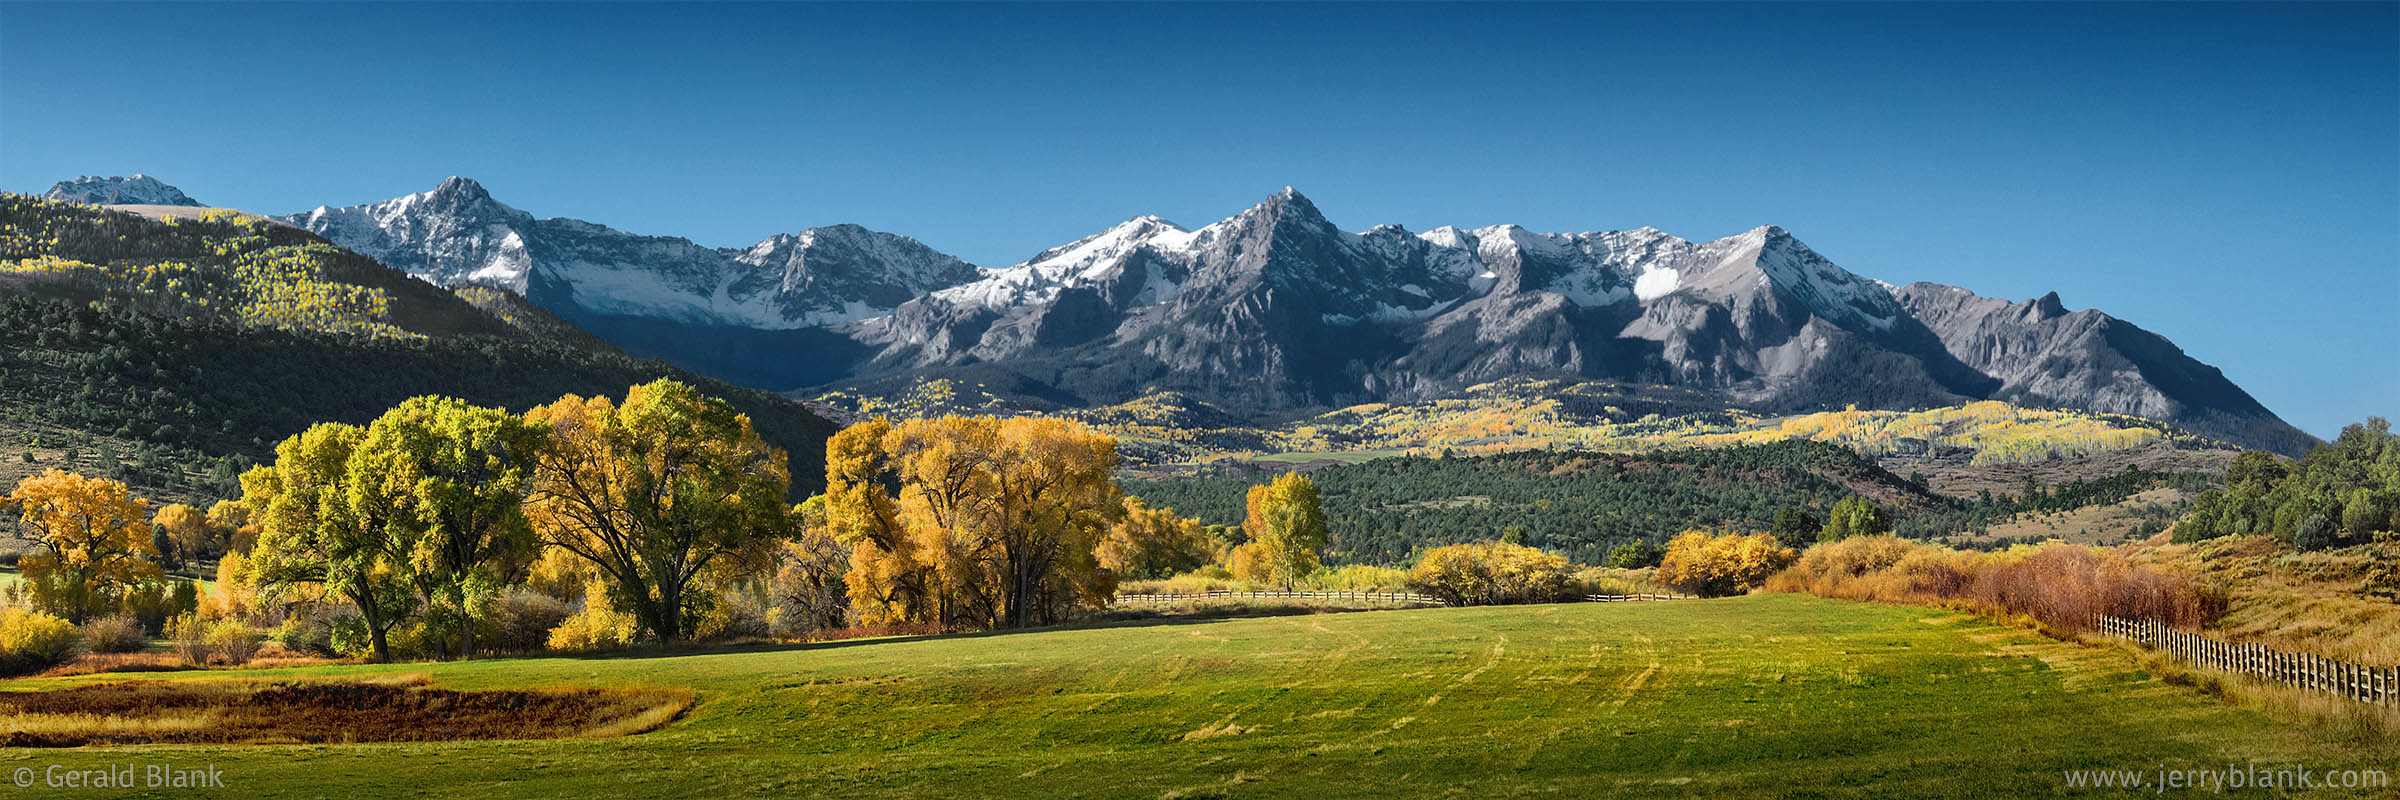 #65699 - An early morning autumn view of the Sneffels Range in the San Juan Mountains of Colorado, as seen from the Dallas Creek valley - photo by Jerry Blank